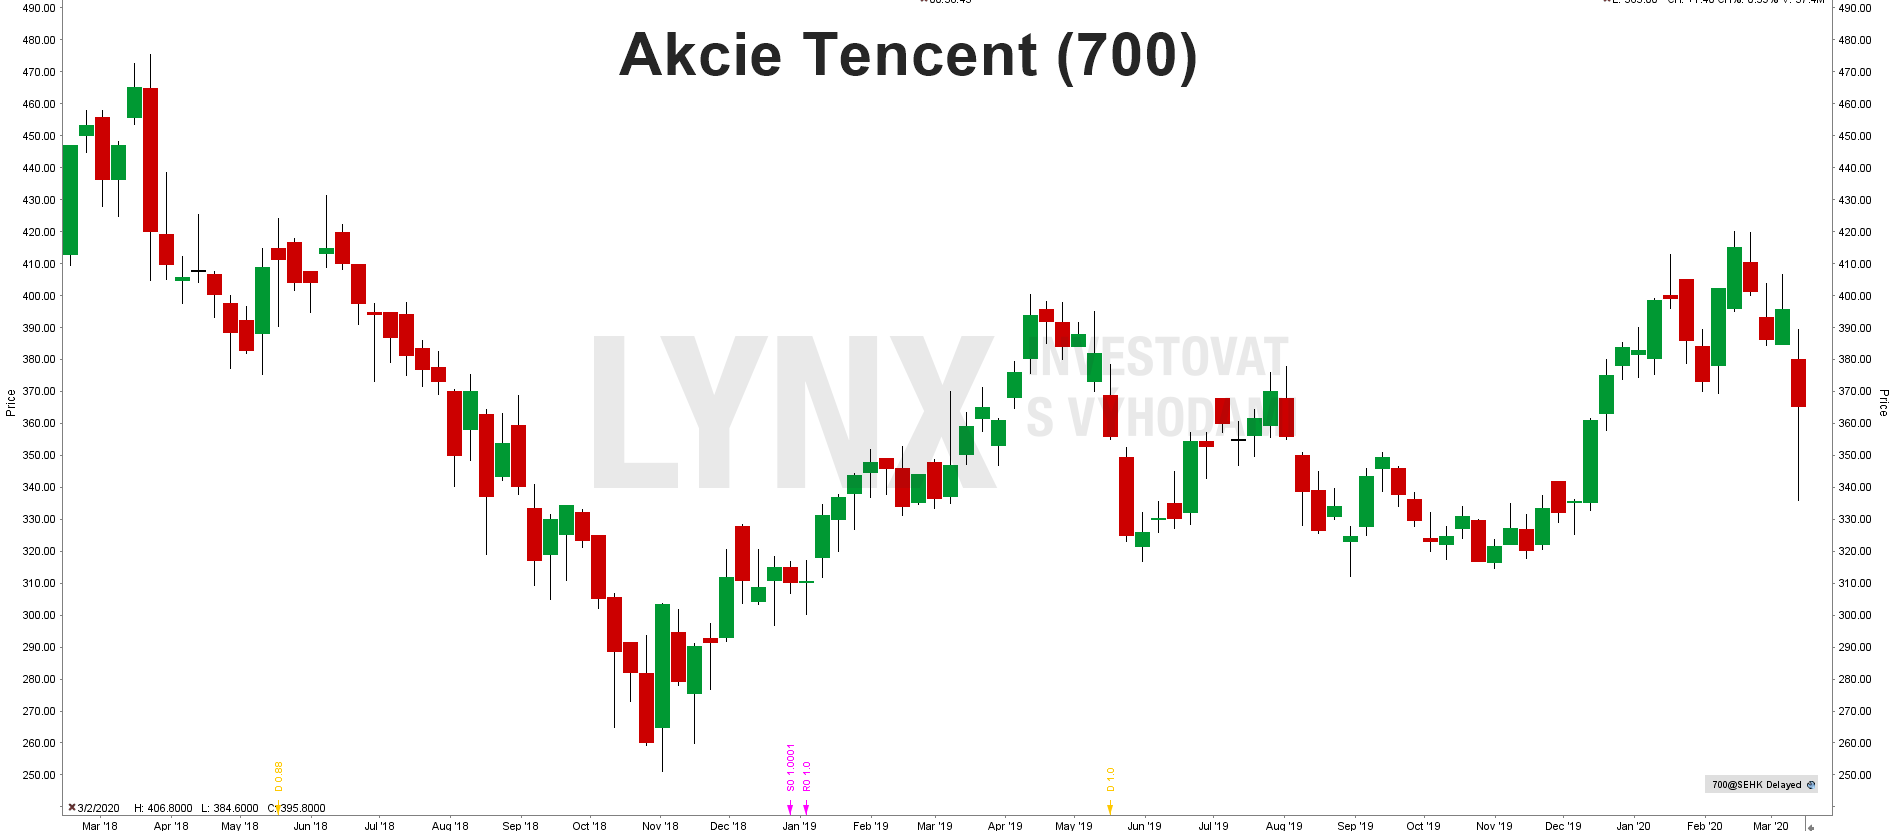 Akcie Tencent